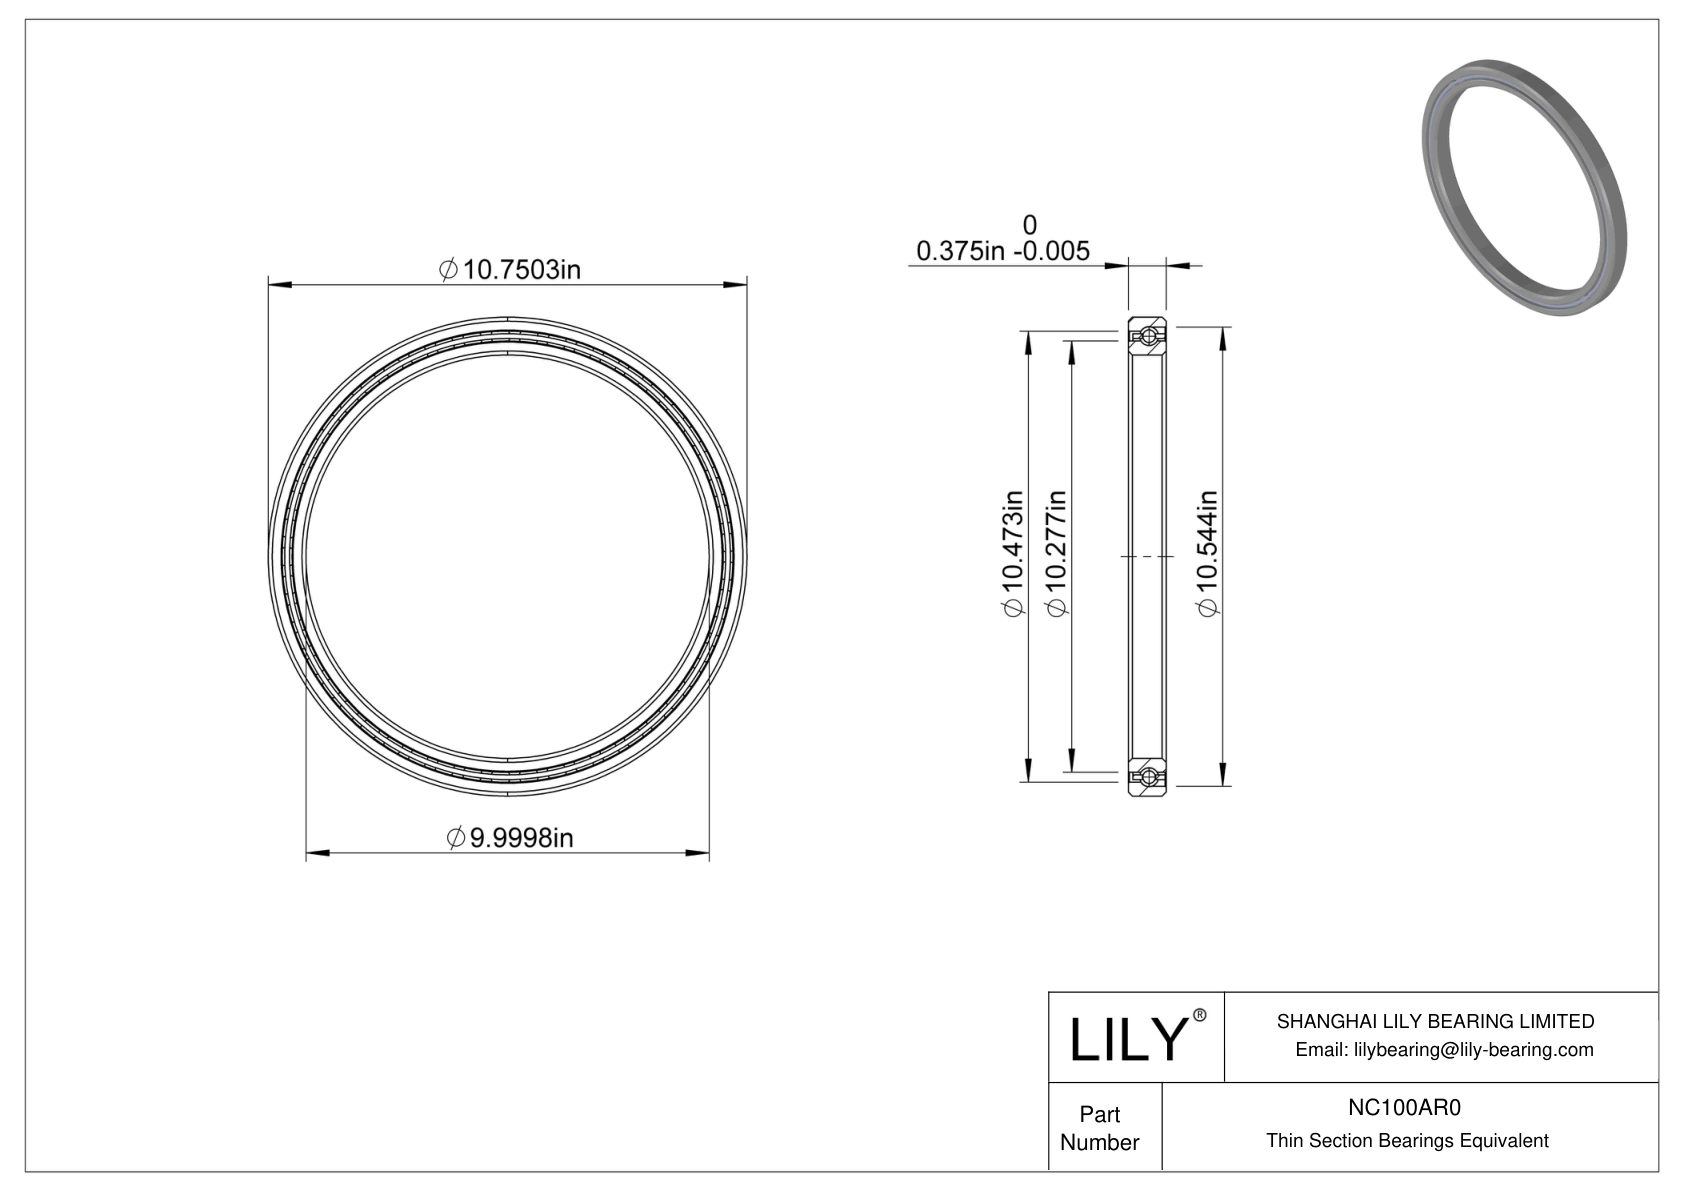 NC100AR0 Constant Section (CS) Bearings cad drawing